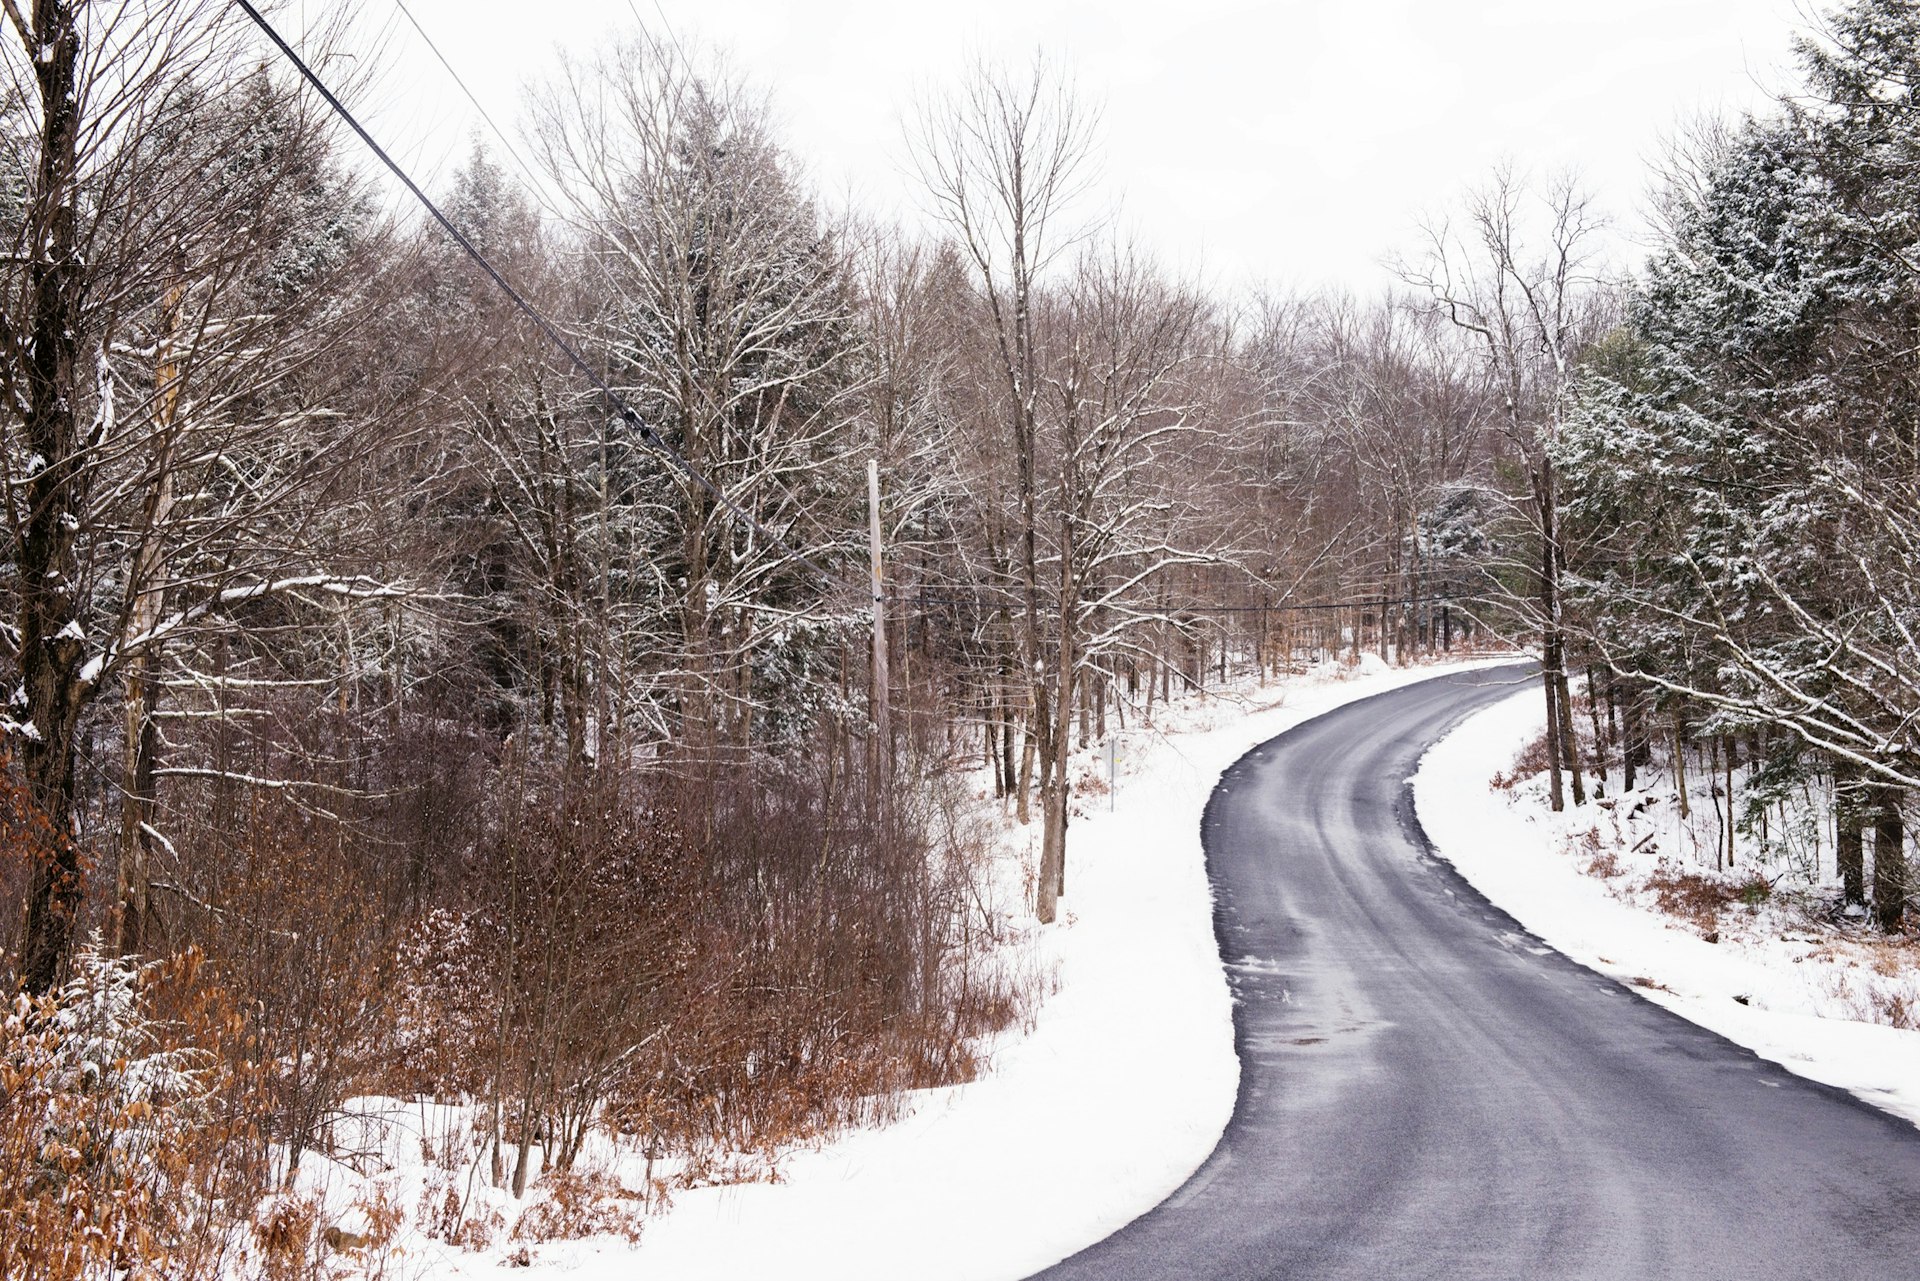 A winding country road in the Catskills mountains. The edges of the paved road are covered in snow. 